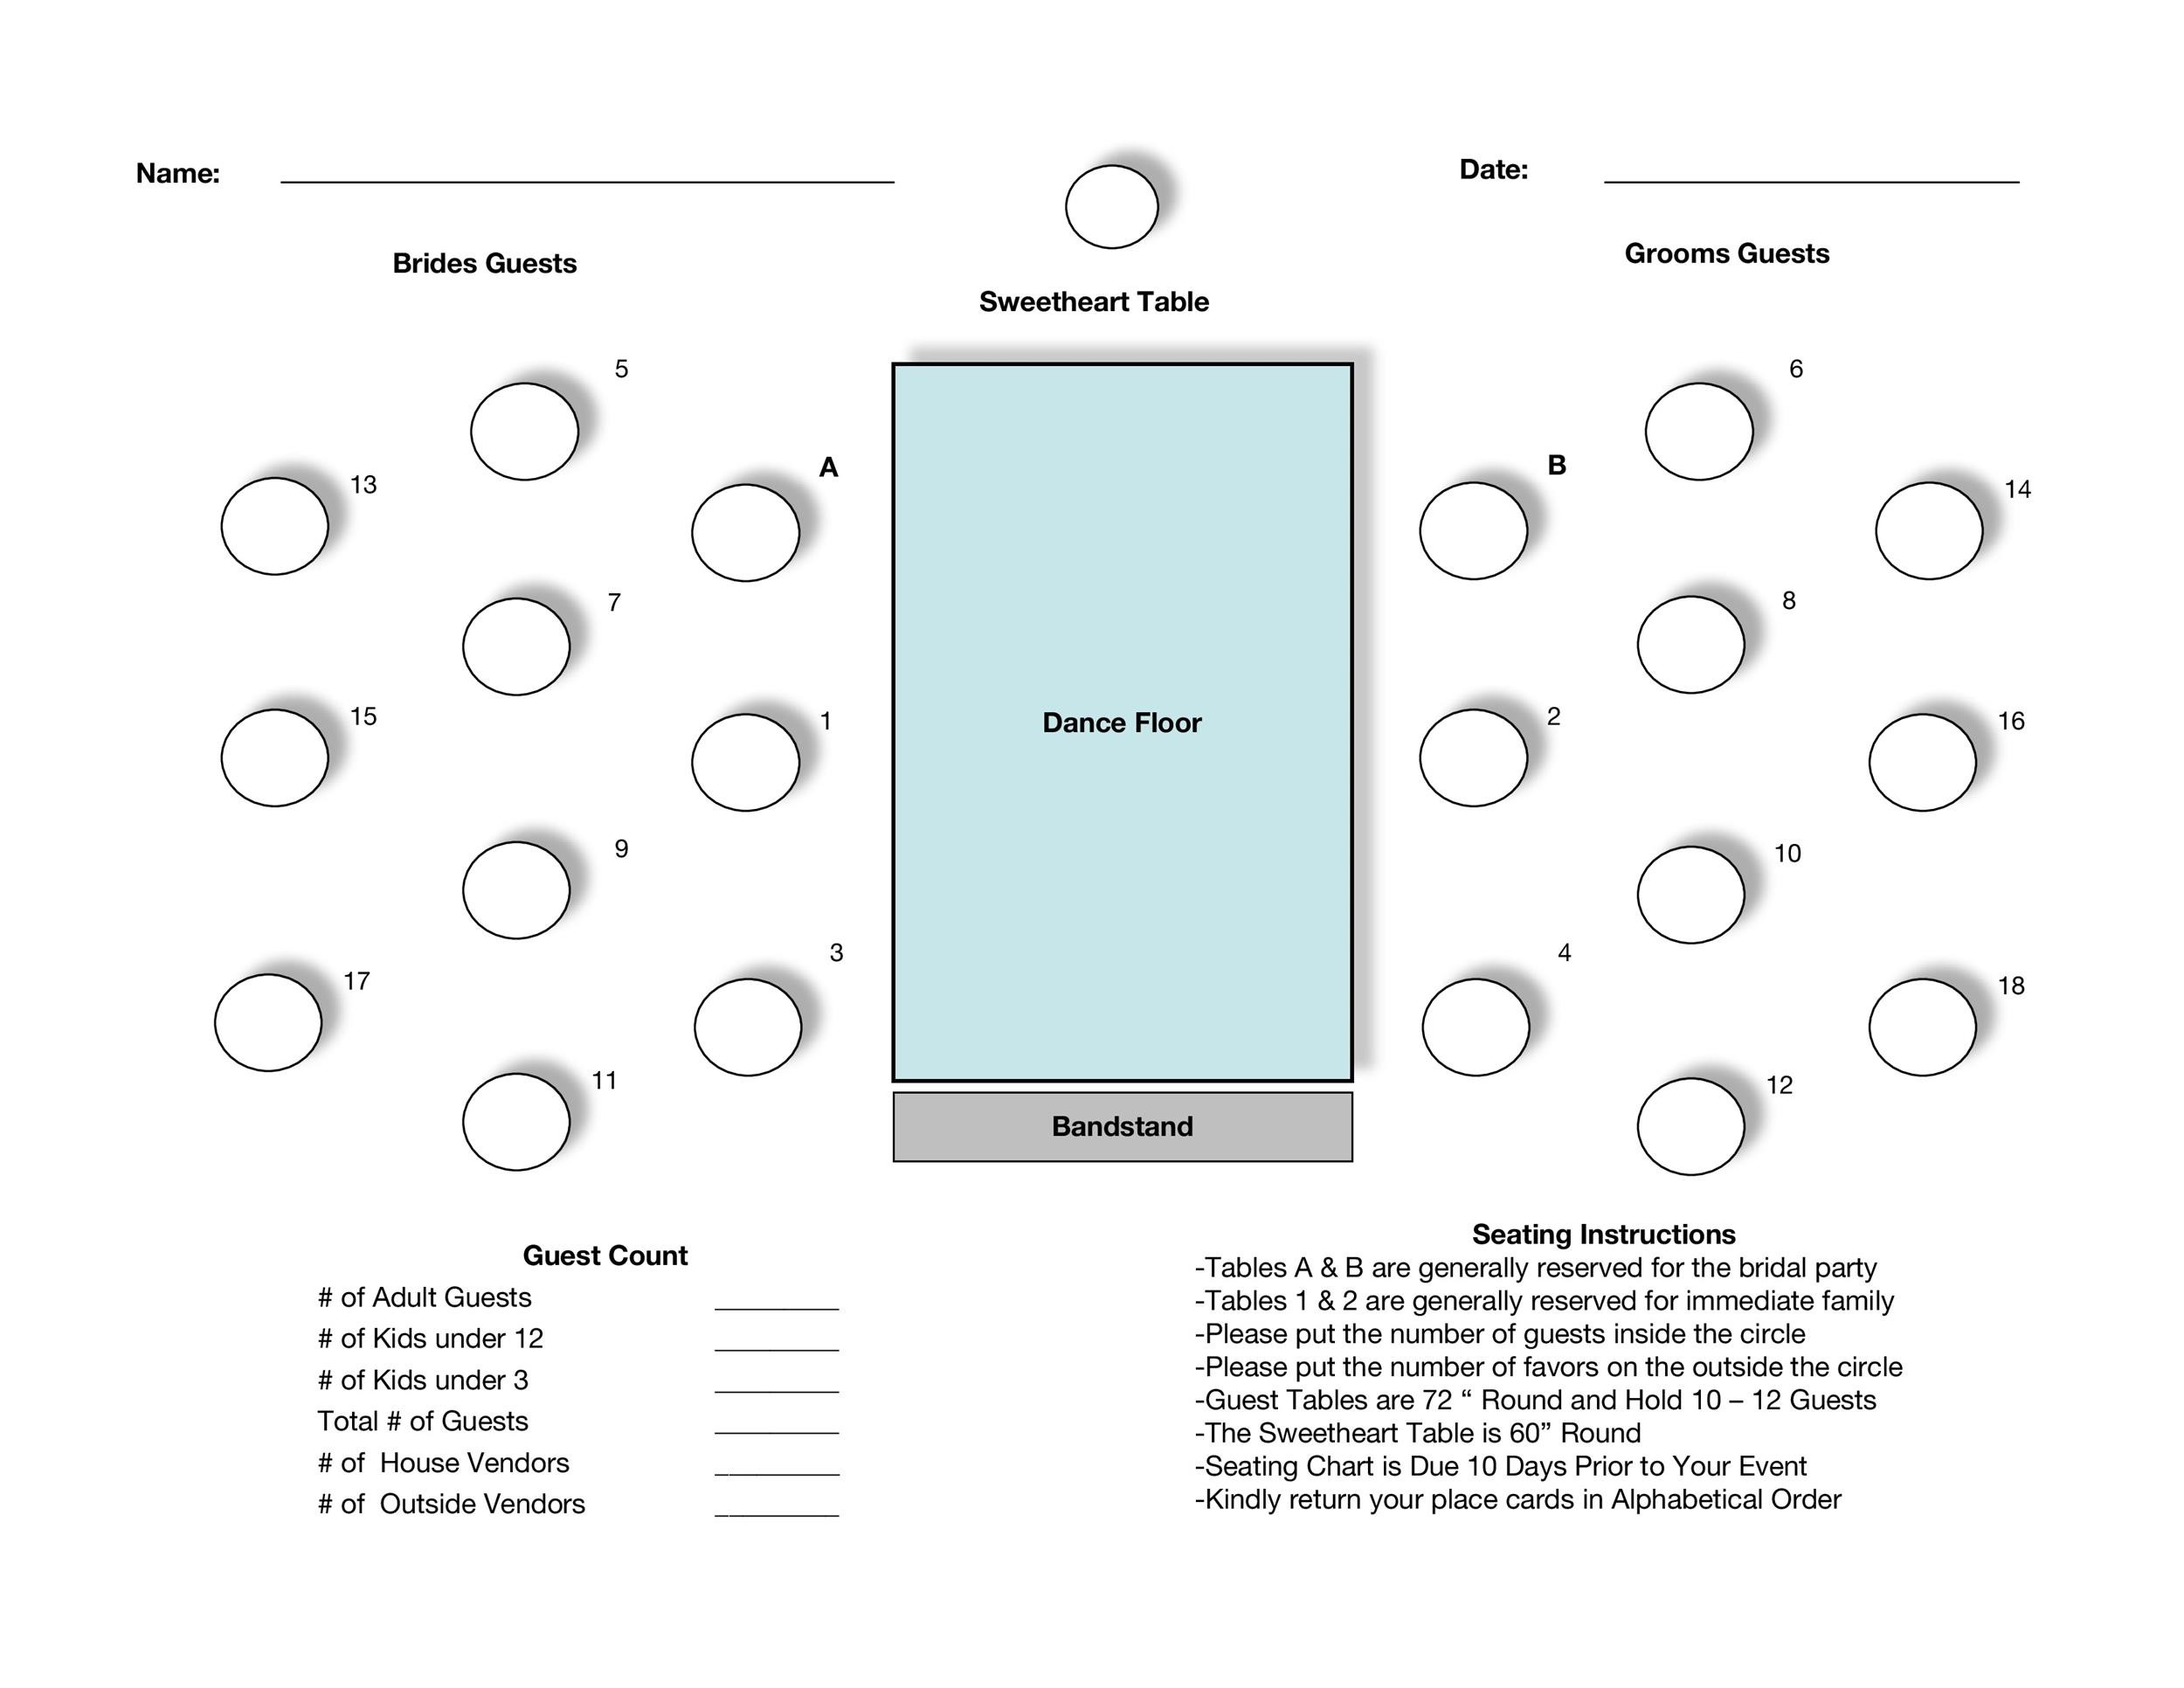 Create Seating Chart Template